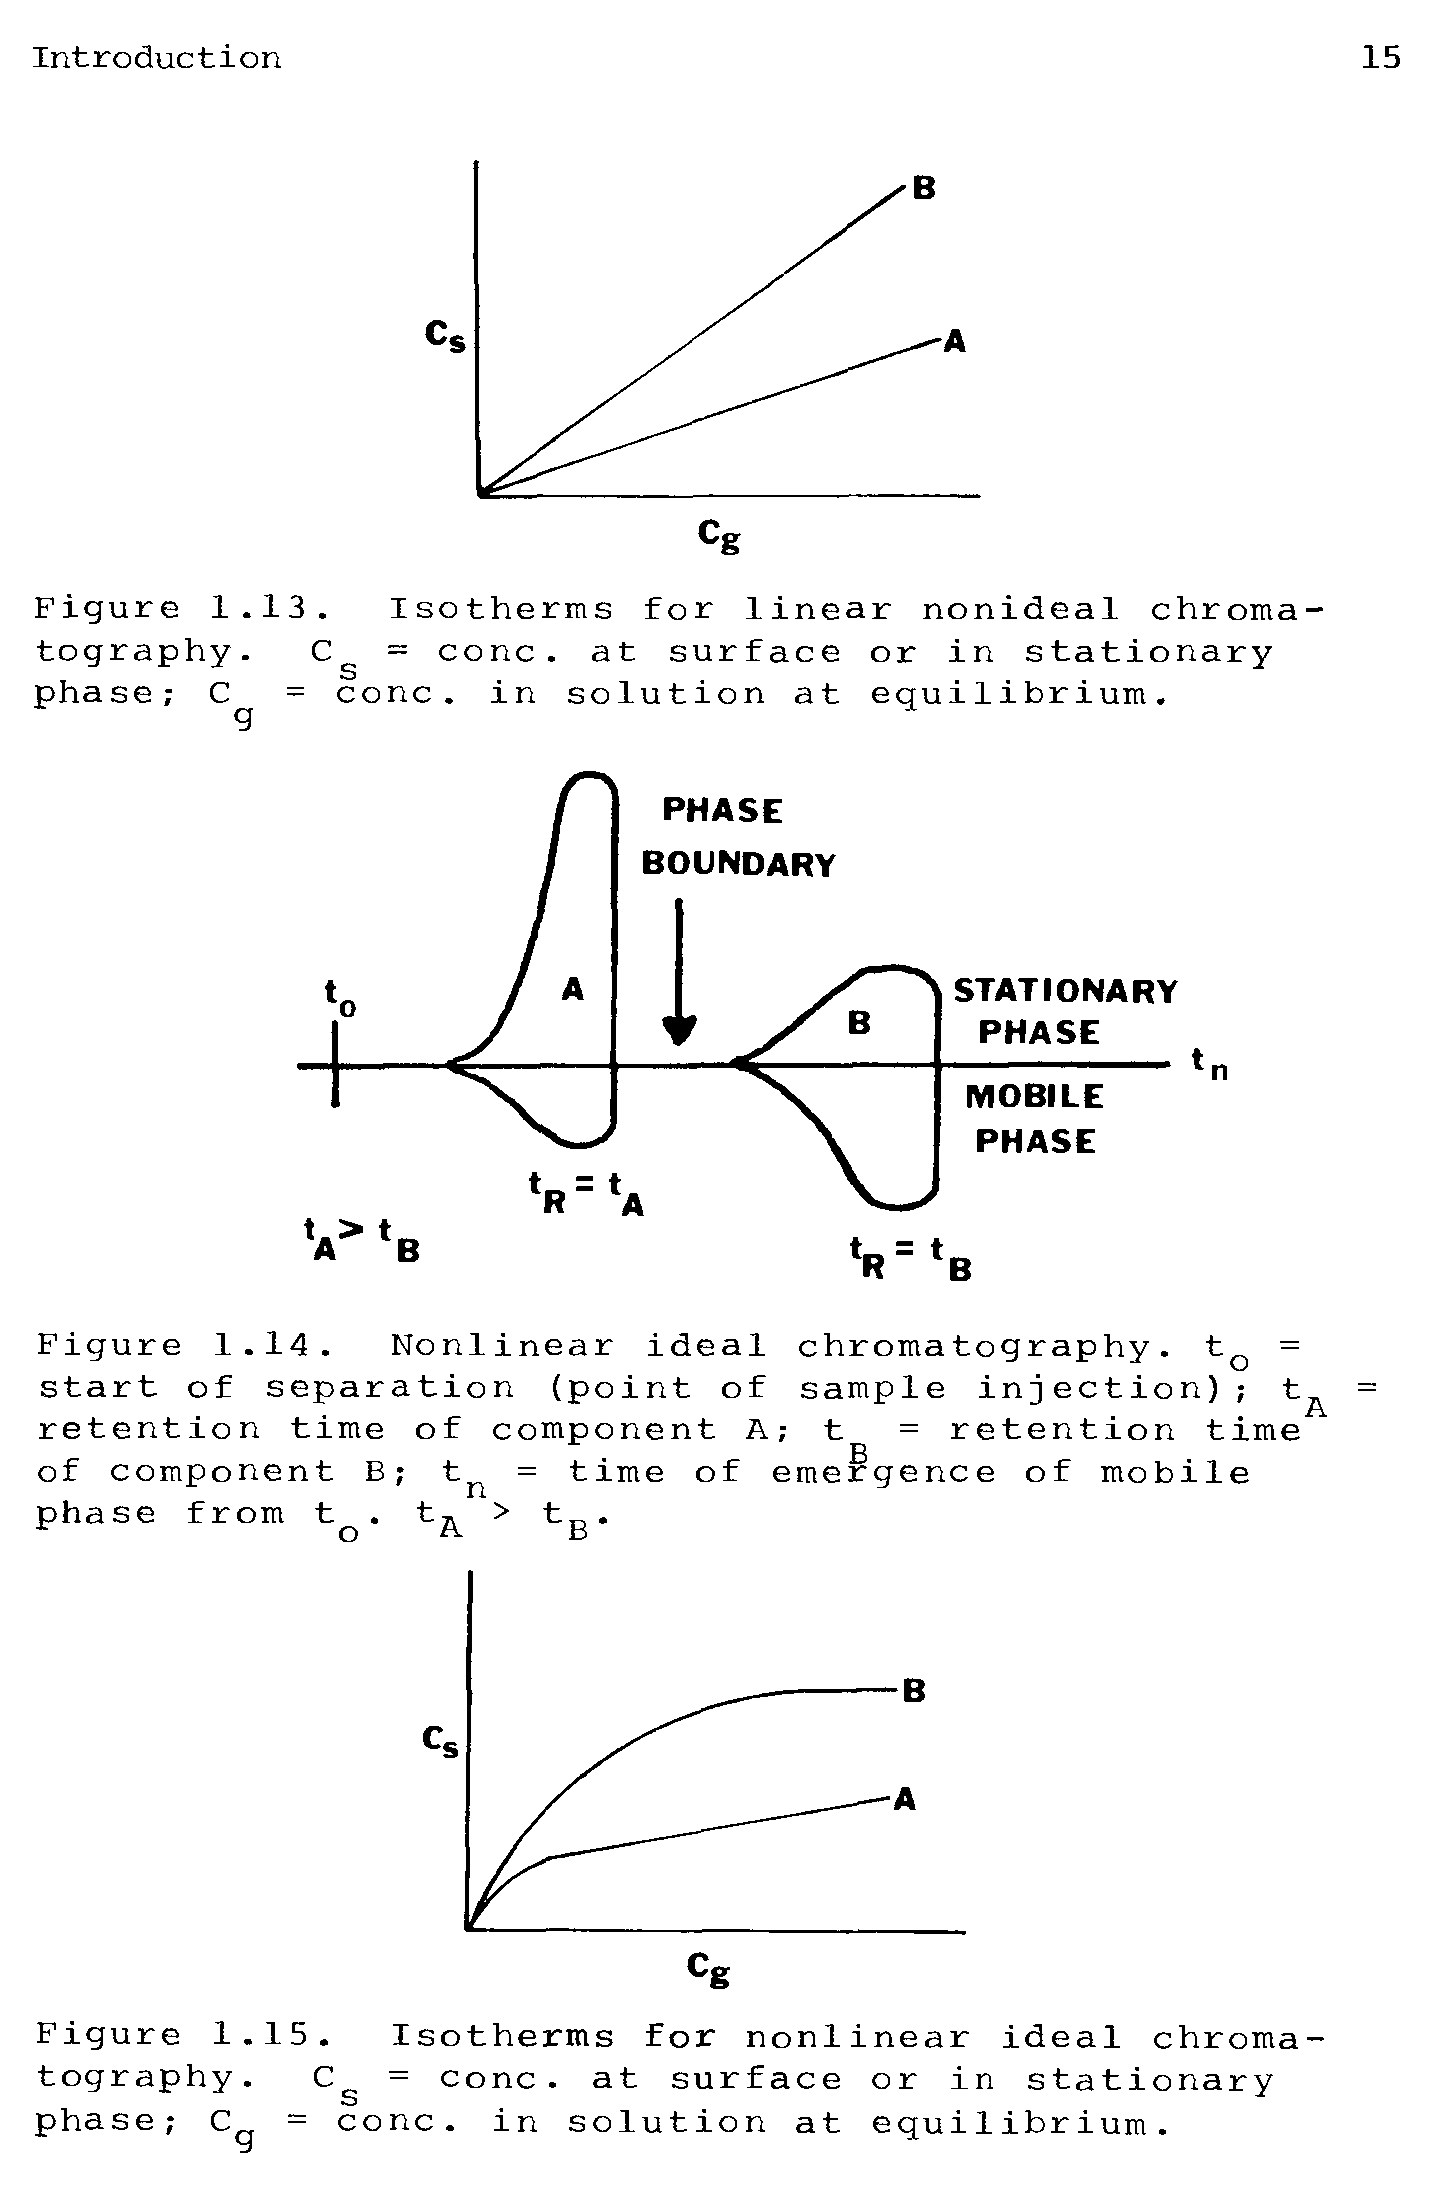 Figure 1.15. Isotherms for nonlinear ideal chromatography. Cg = cone, at surface or in stationary phase Cg = cone, in solution at equilibrium.